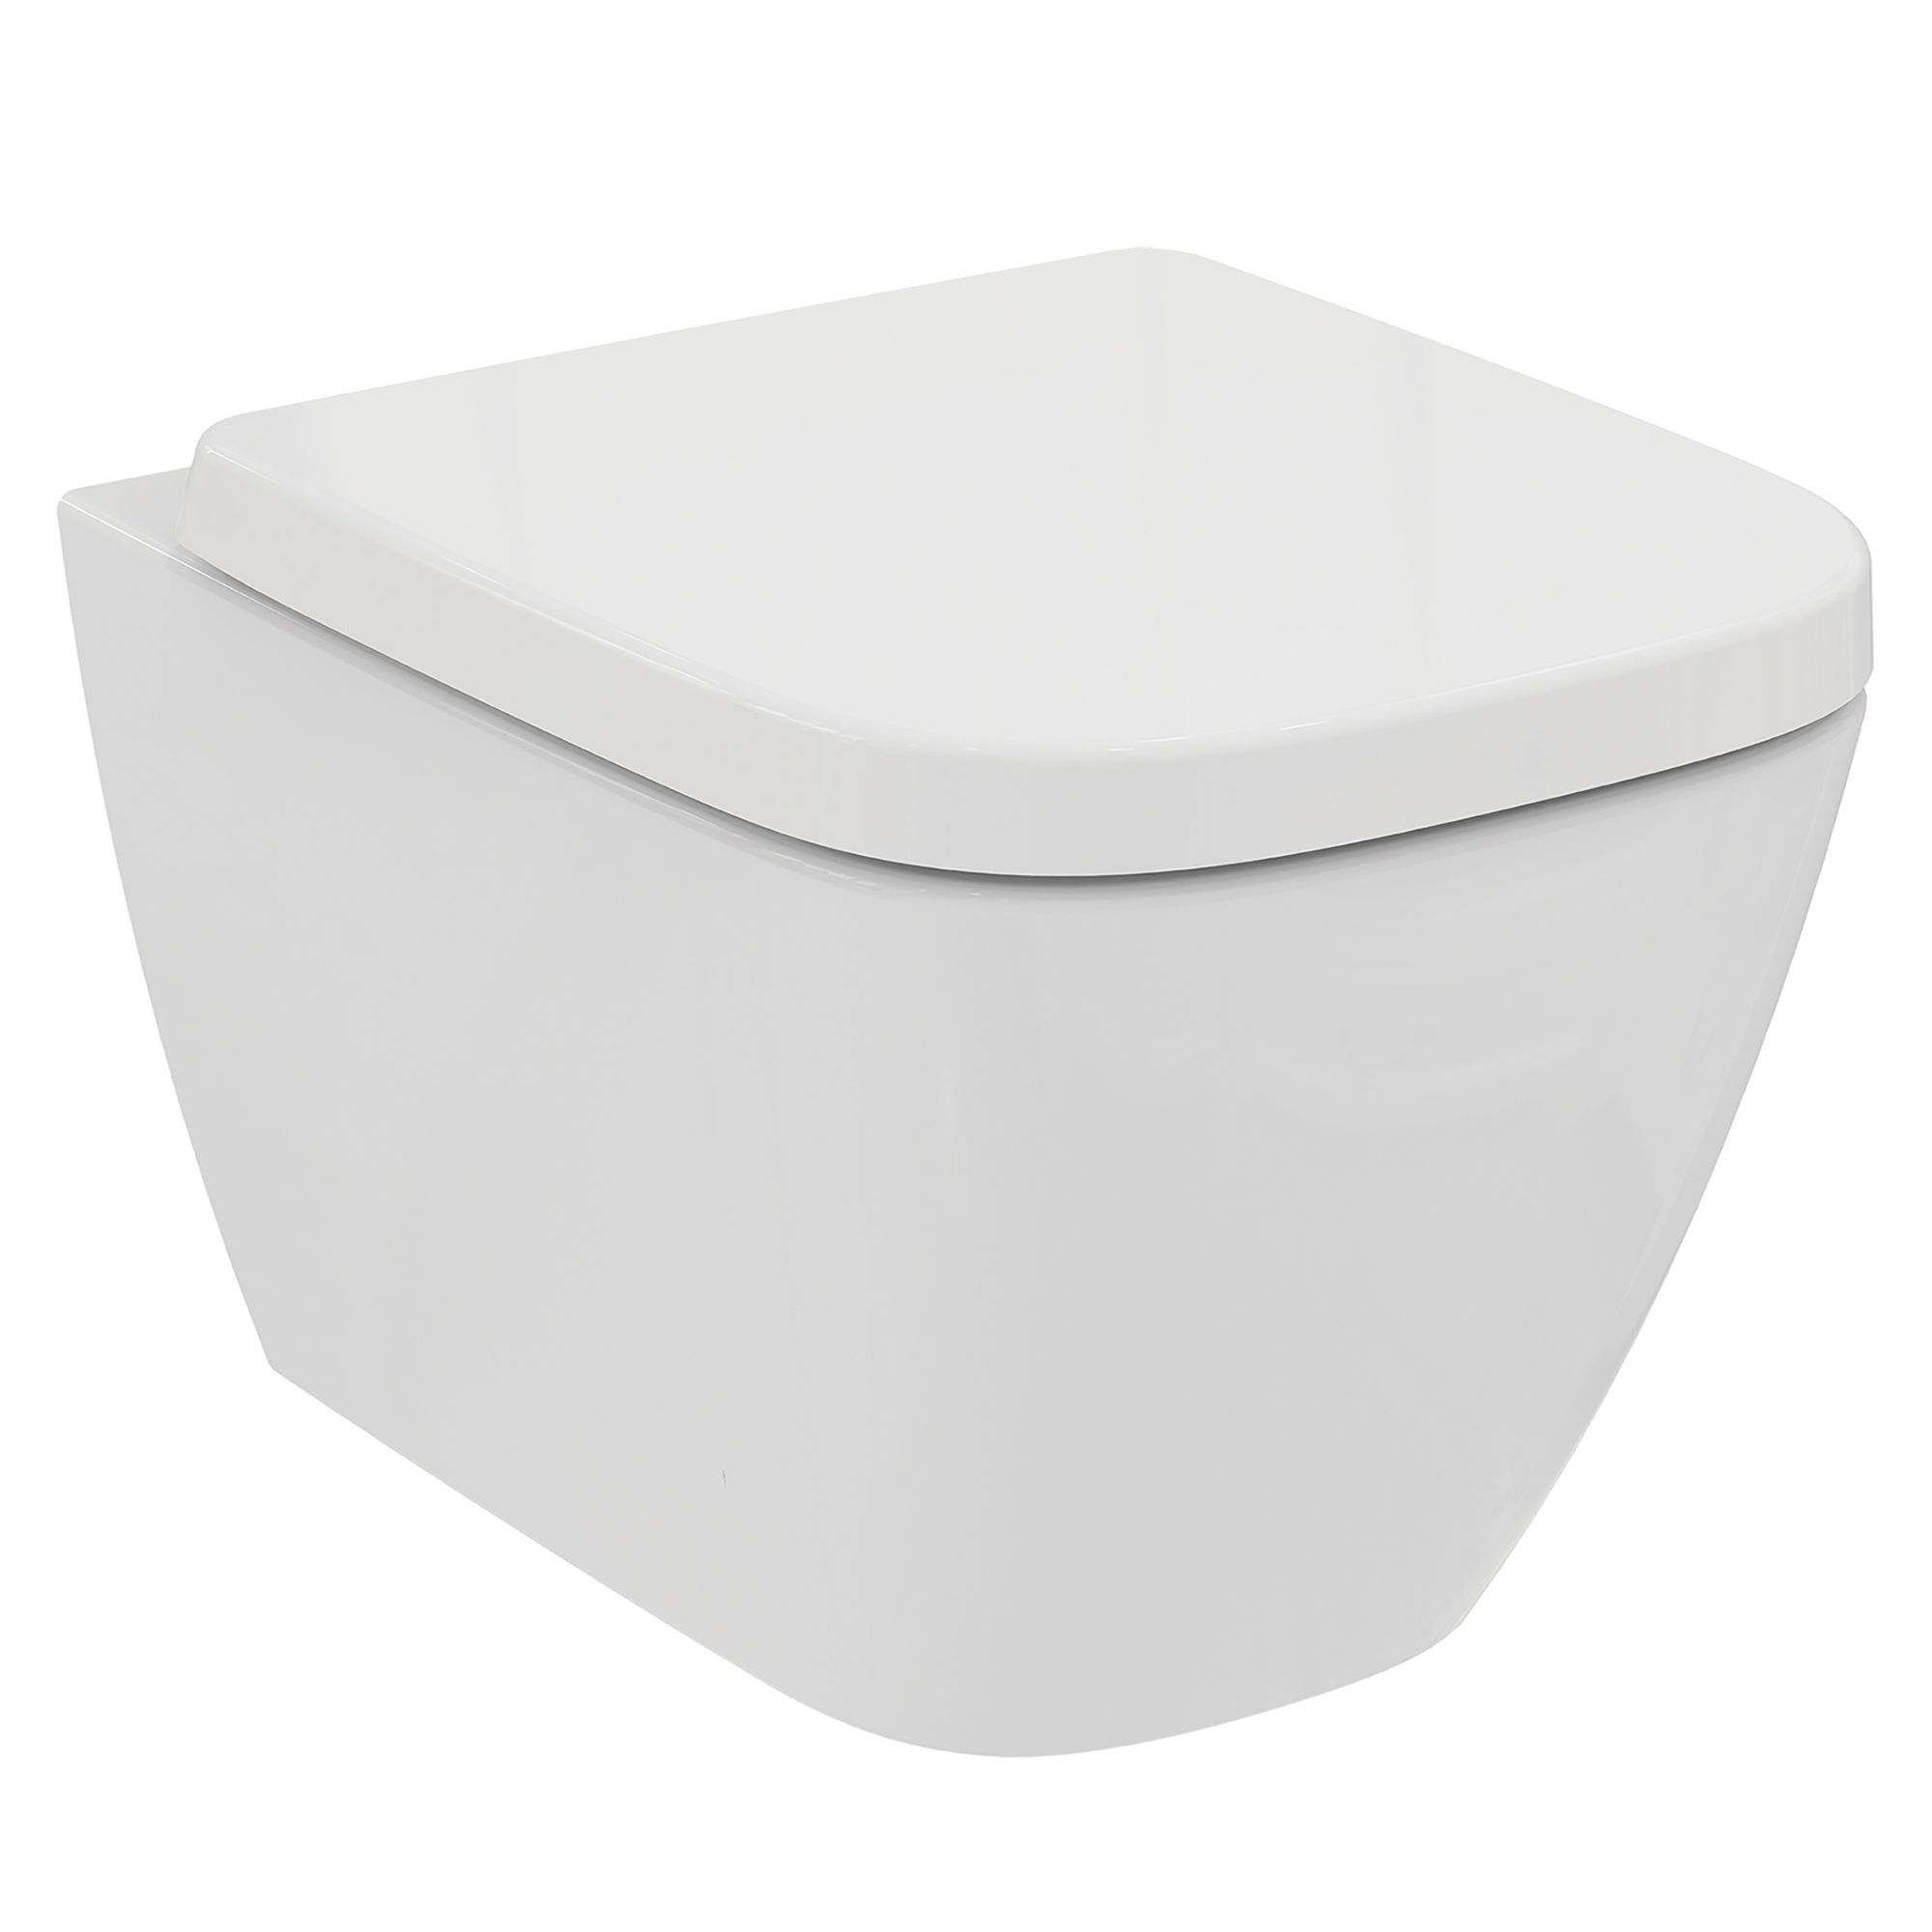 Ideal Standard Concept Freedom Comfort height White Boxed rim Wall